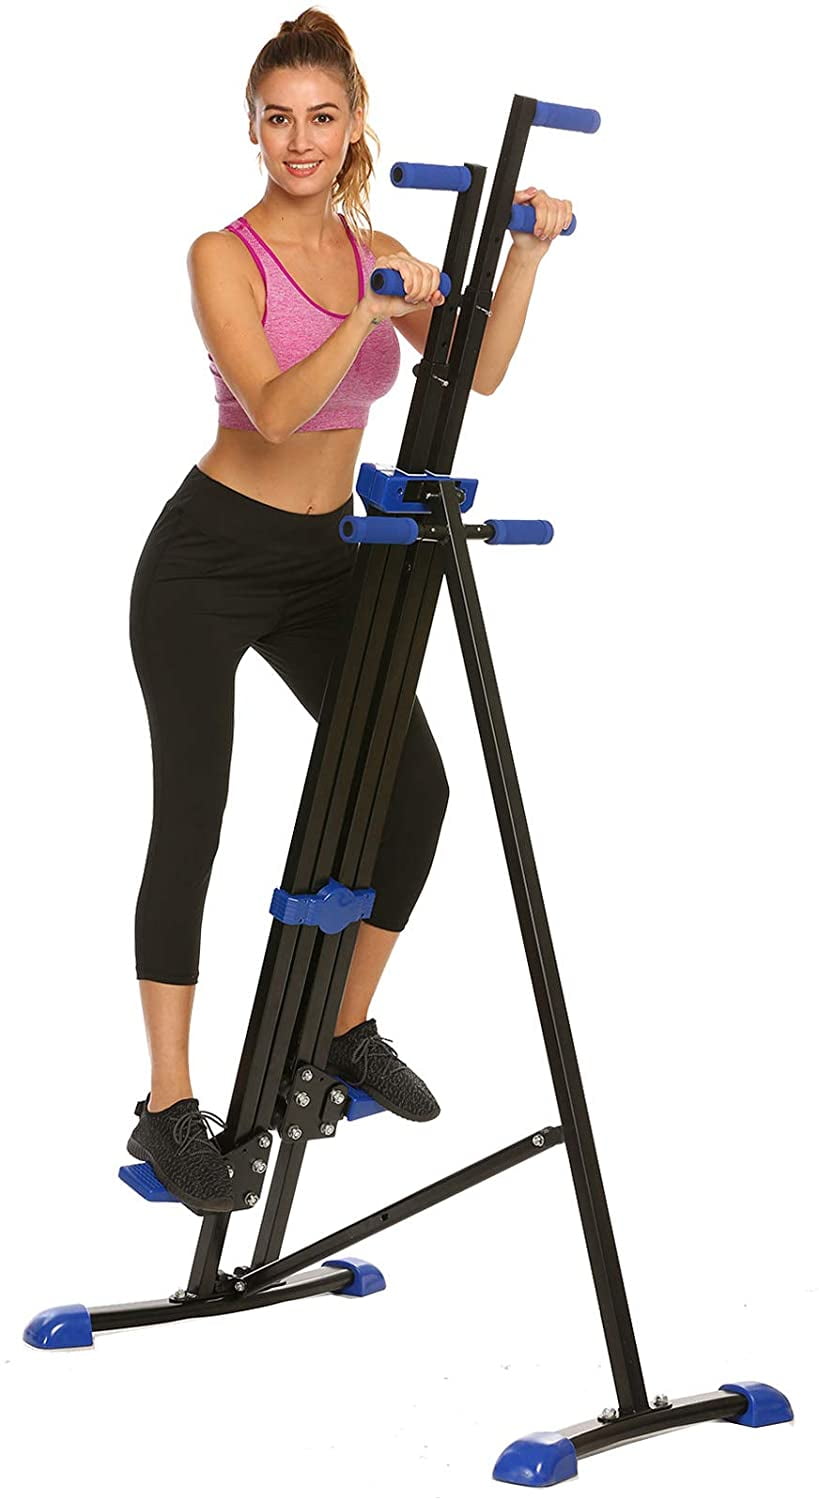 Details about   Home Gym Vertical Climber Cardio Total Body Fitness Workout Air Stepper Machine 